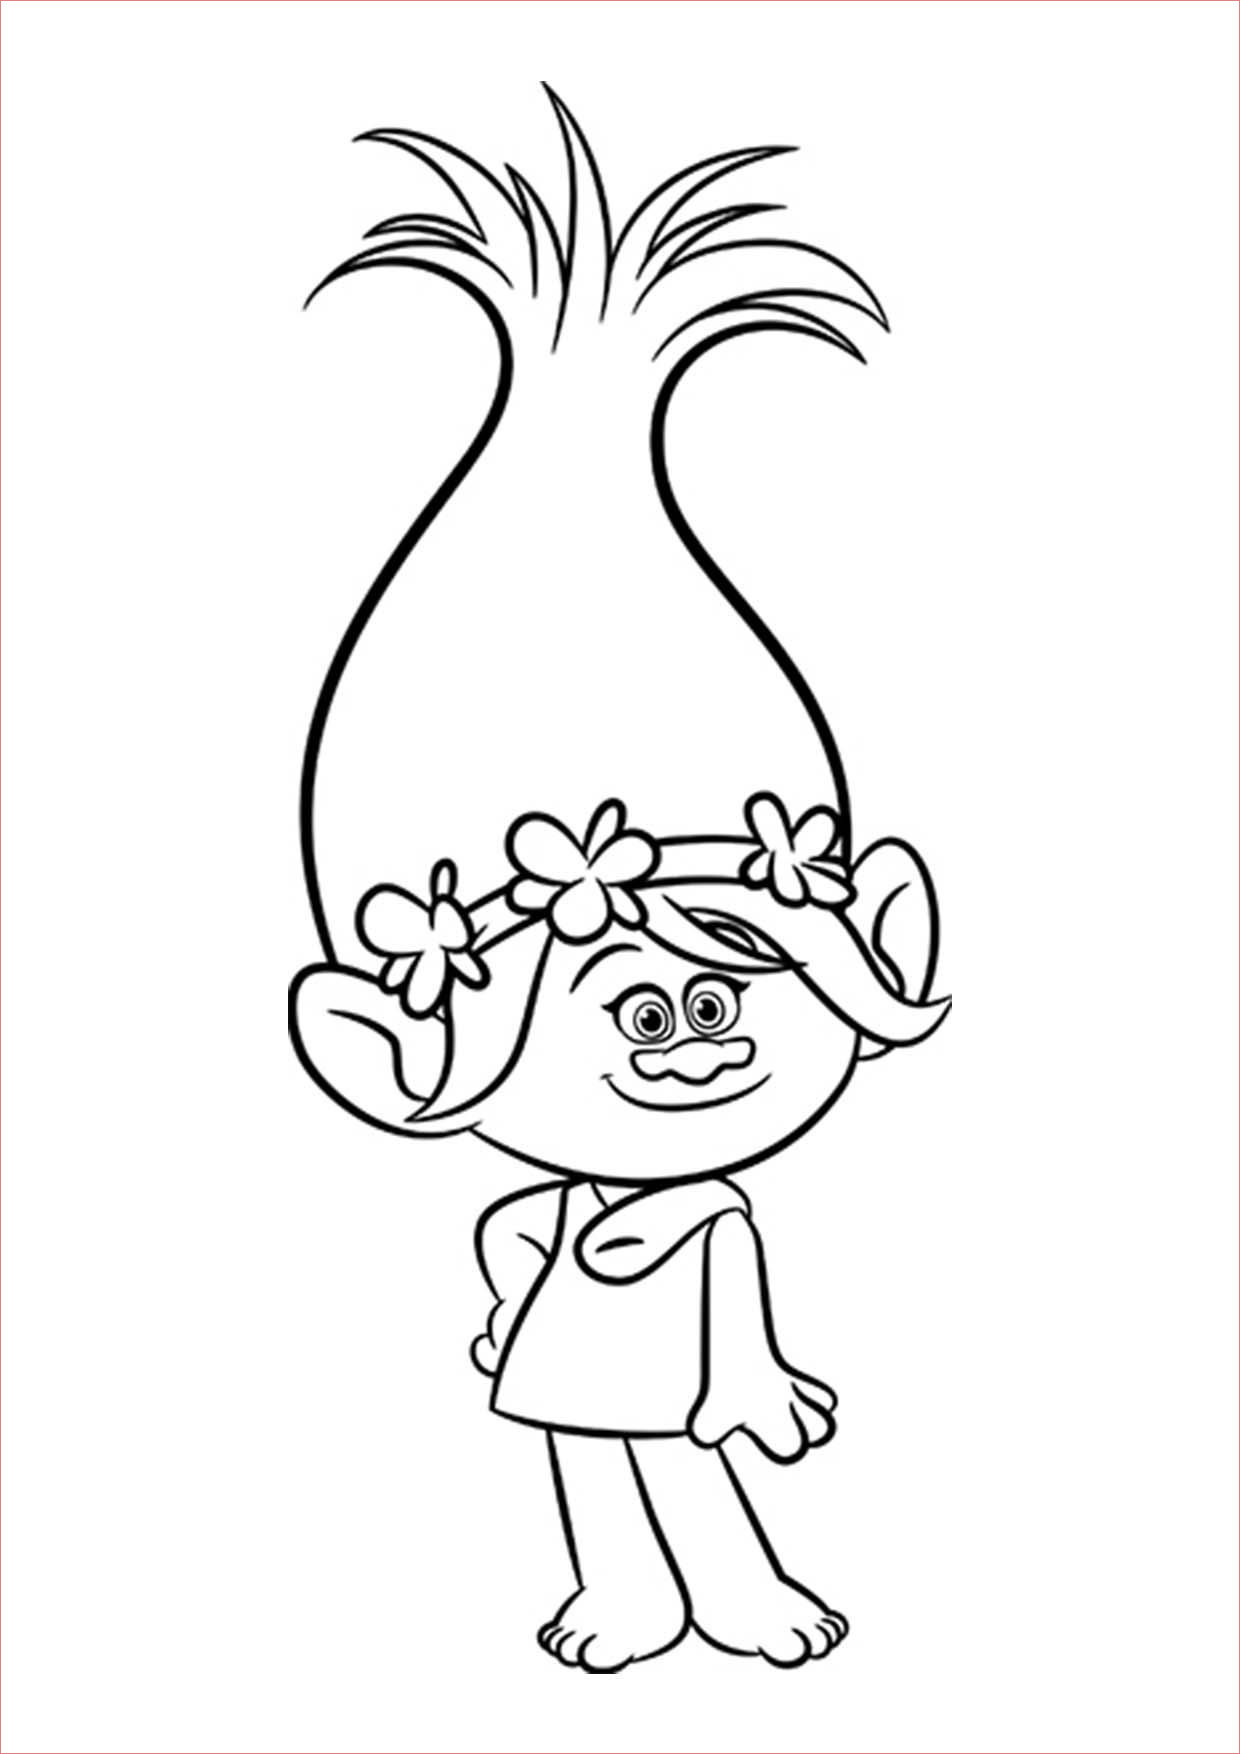 Coloriage Troll Nice Coloriage Les Trolls Poppy Toujours Souriante